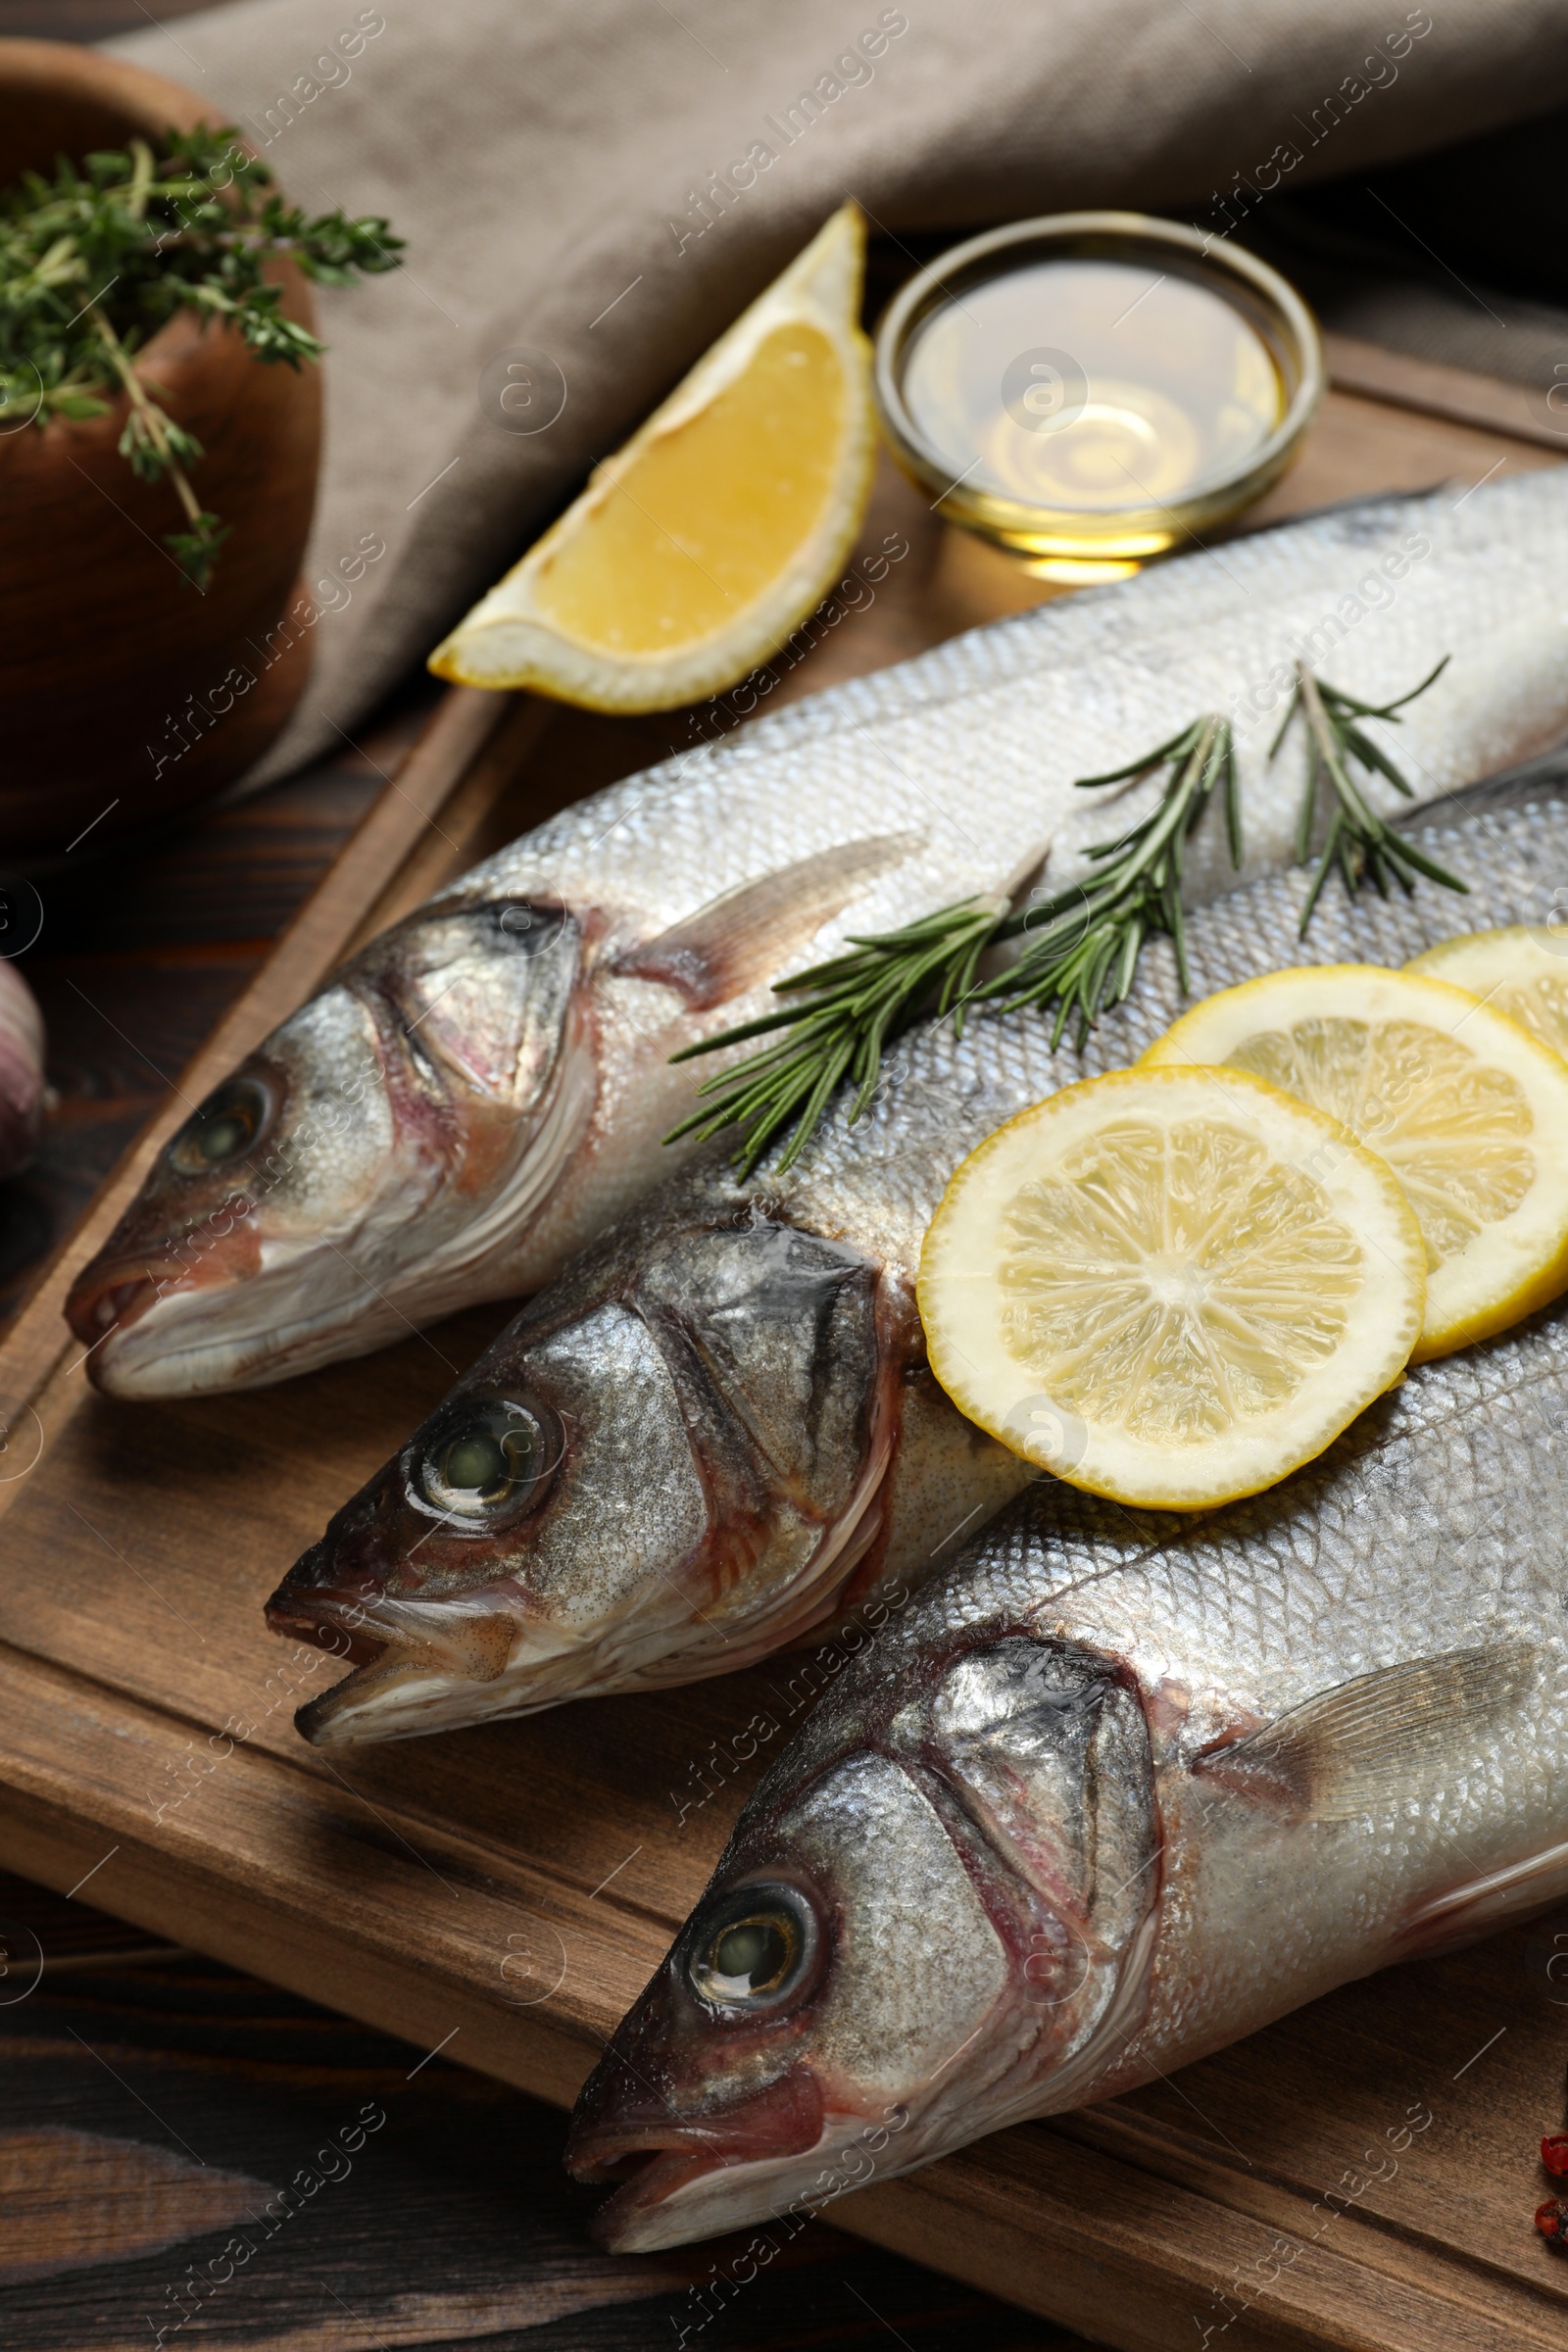 Photo of Sea bass fish and ingredients on wooden table, closeup